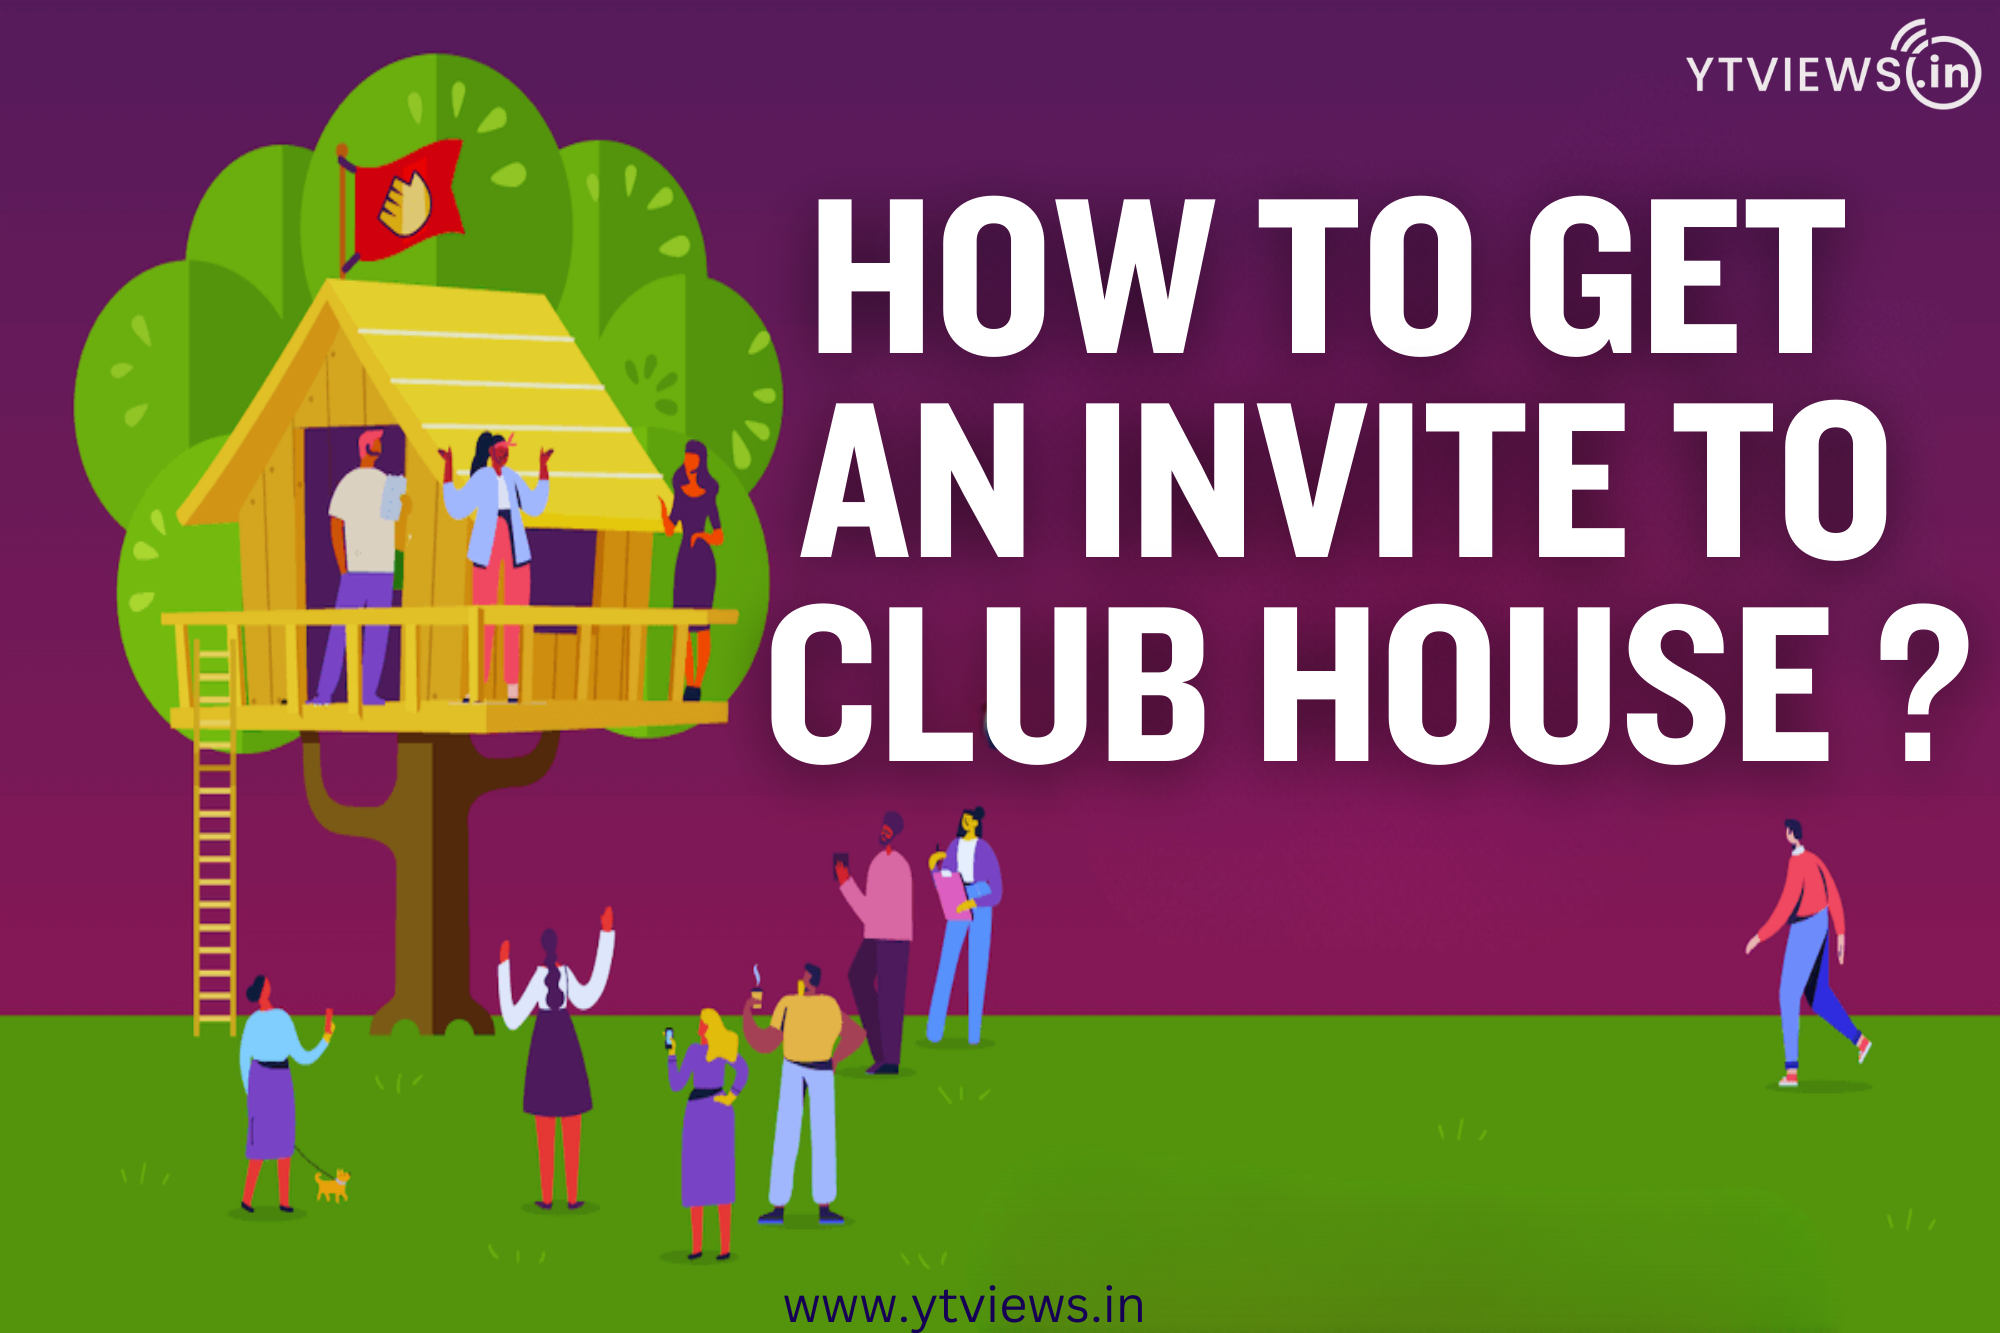 How to get an invite to Clubhouse